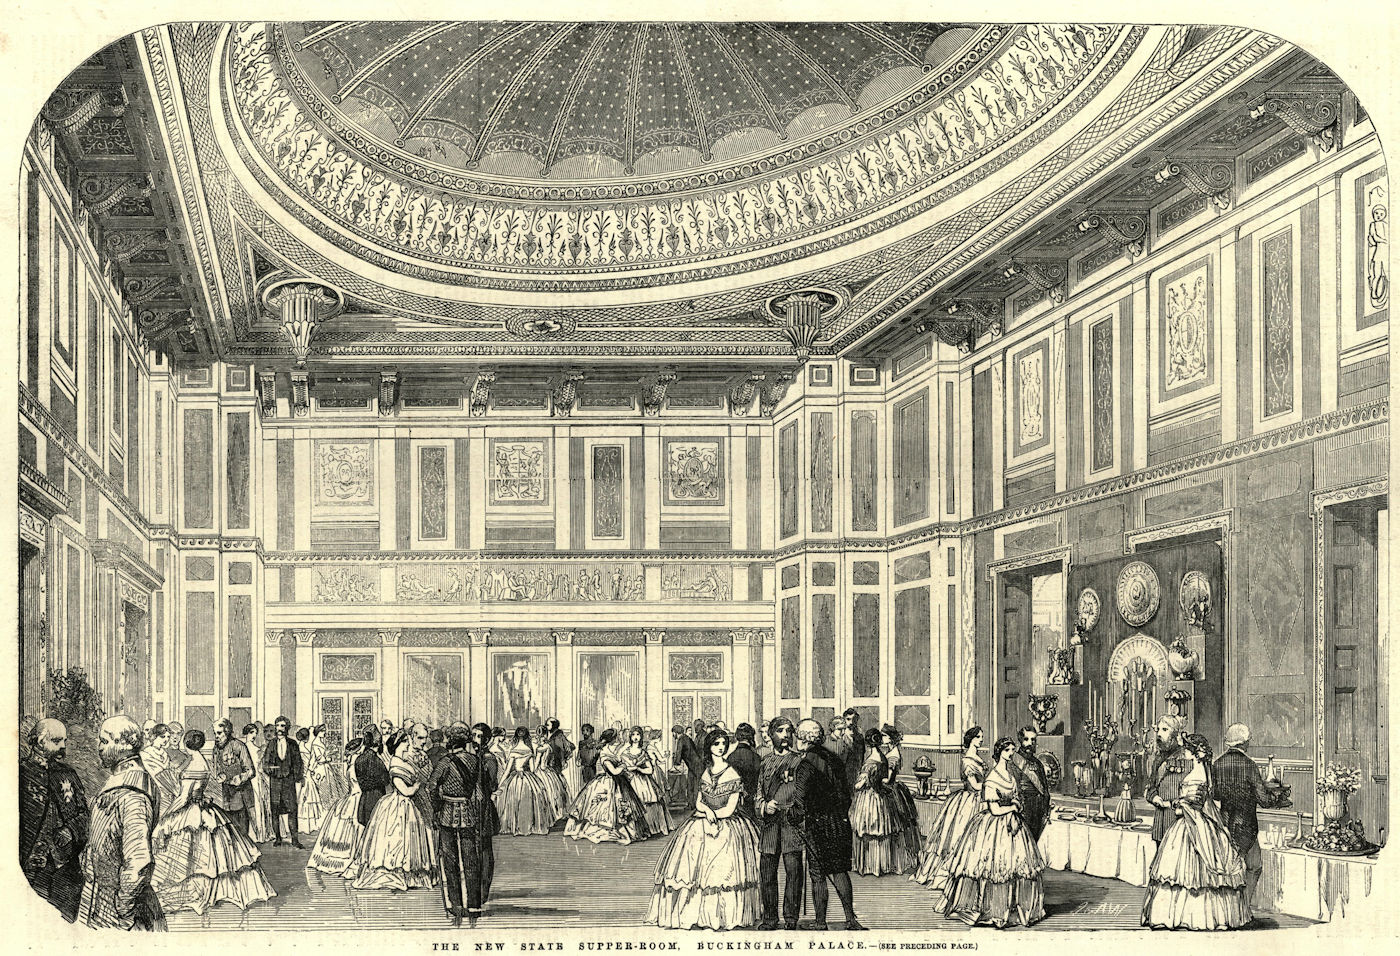 The new state supper room, Buckingham Palace. London 1857 old antique print